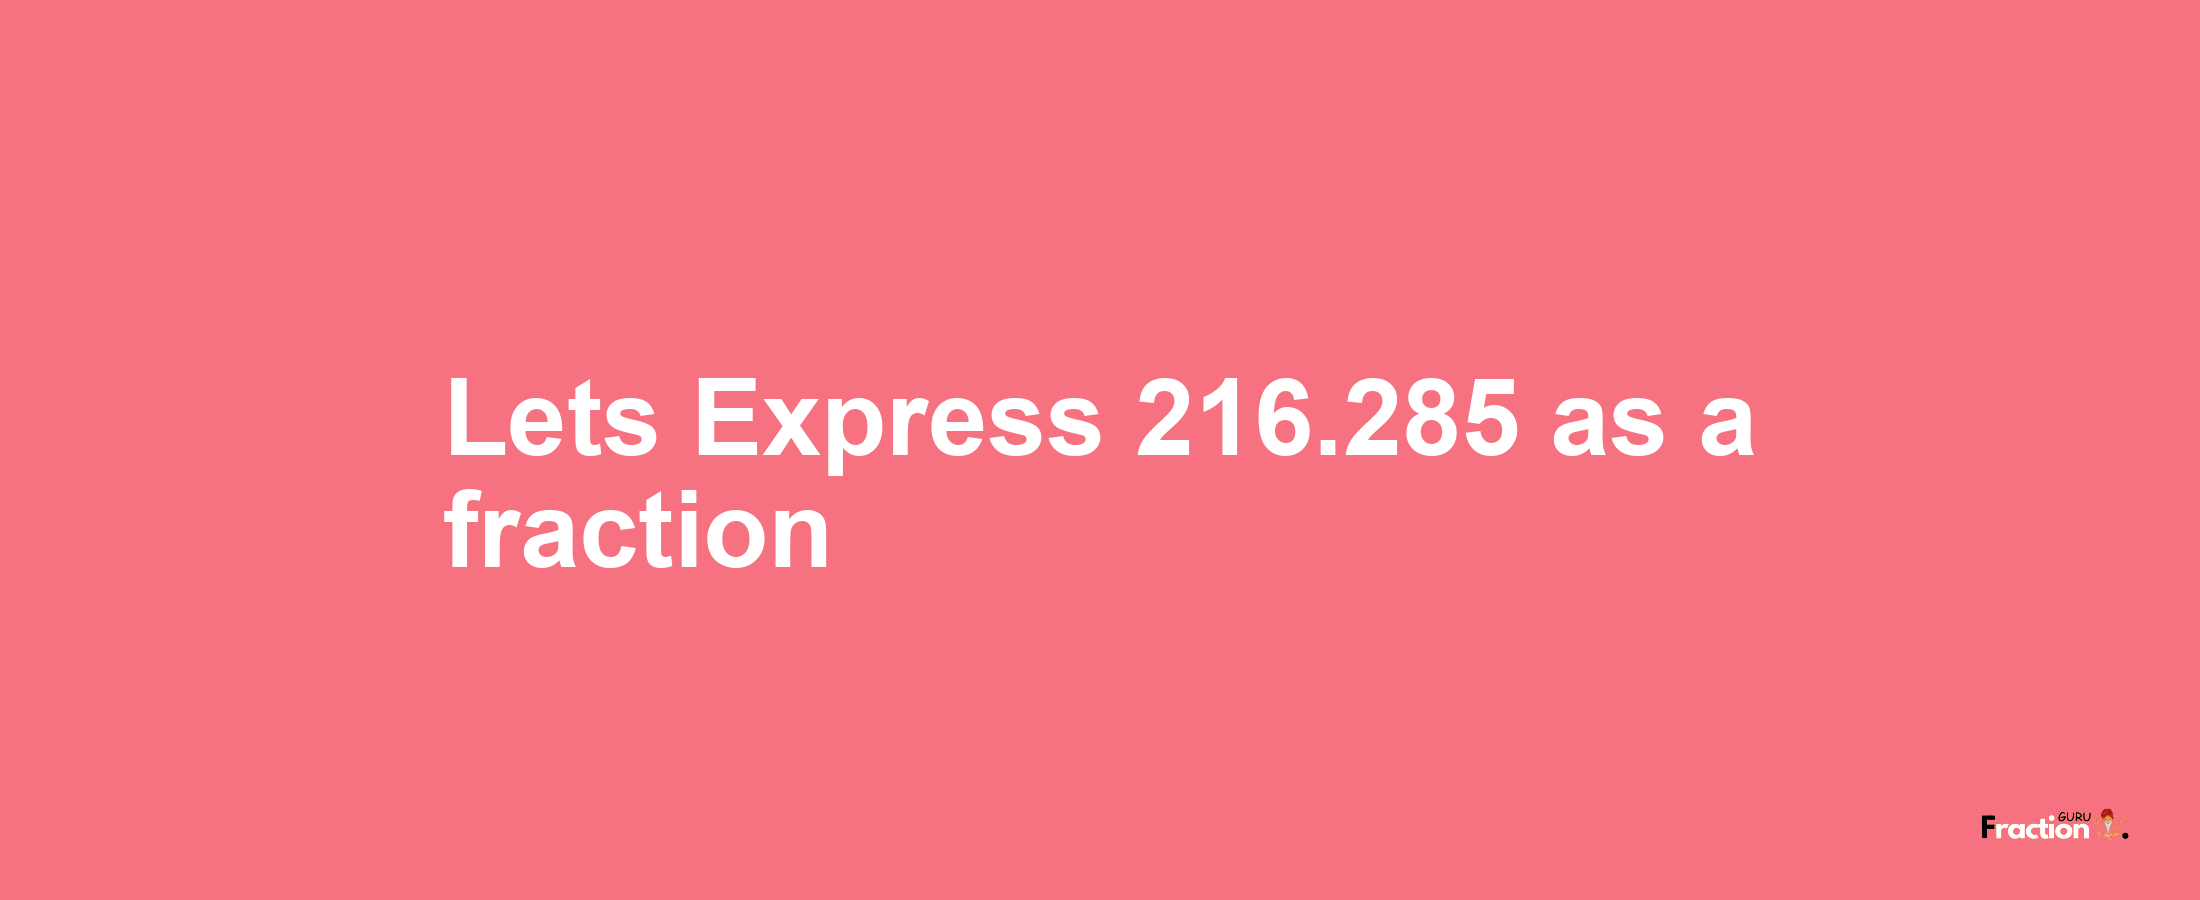 Lets Express 216.285 as afraction